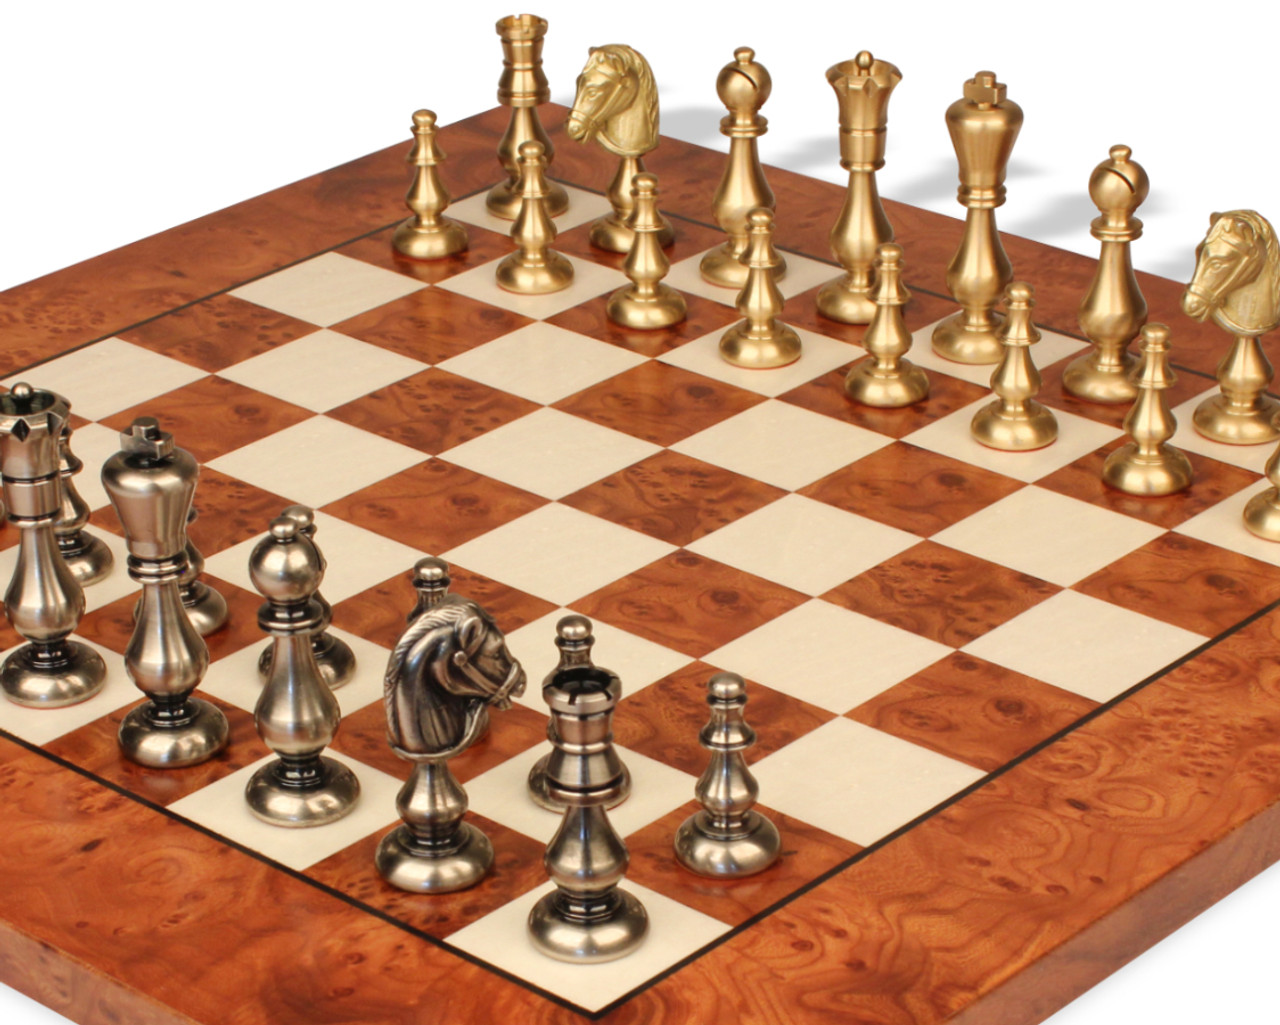 Contemporary Staunton Solid Brass Chess Set with Elm Burl Chess 